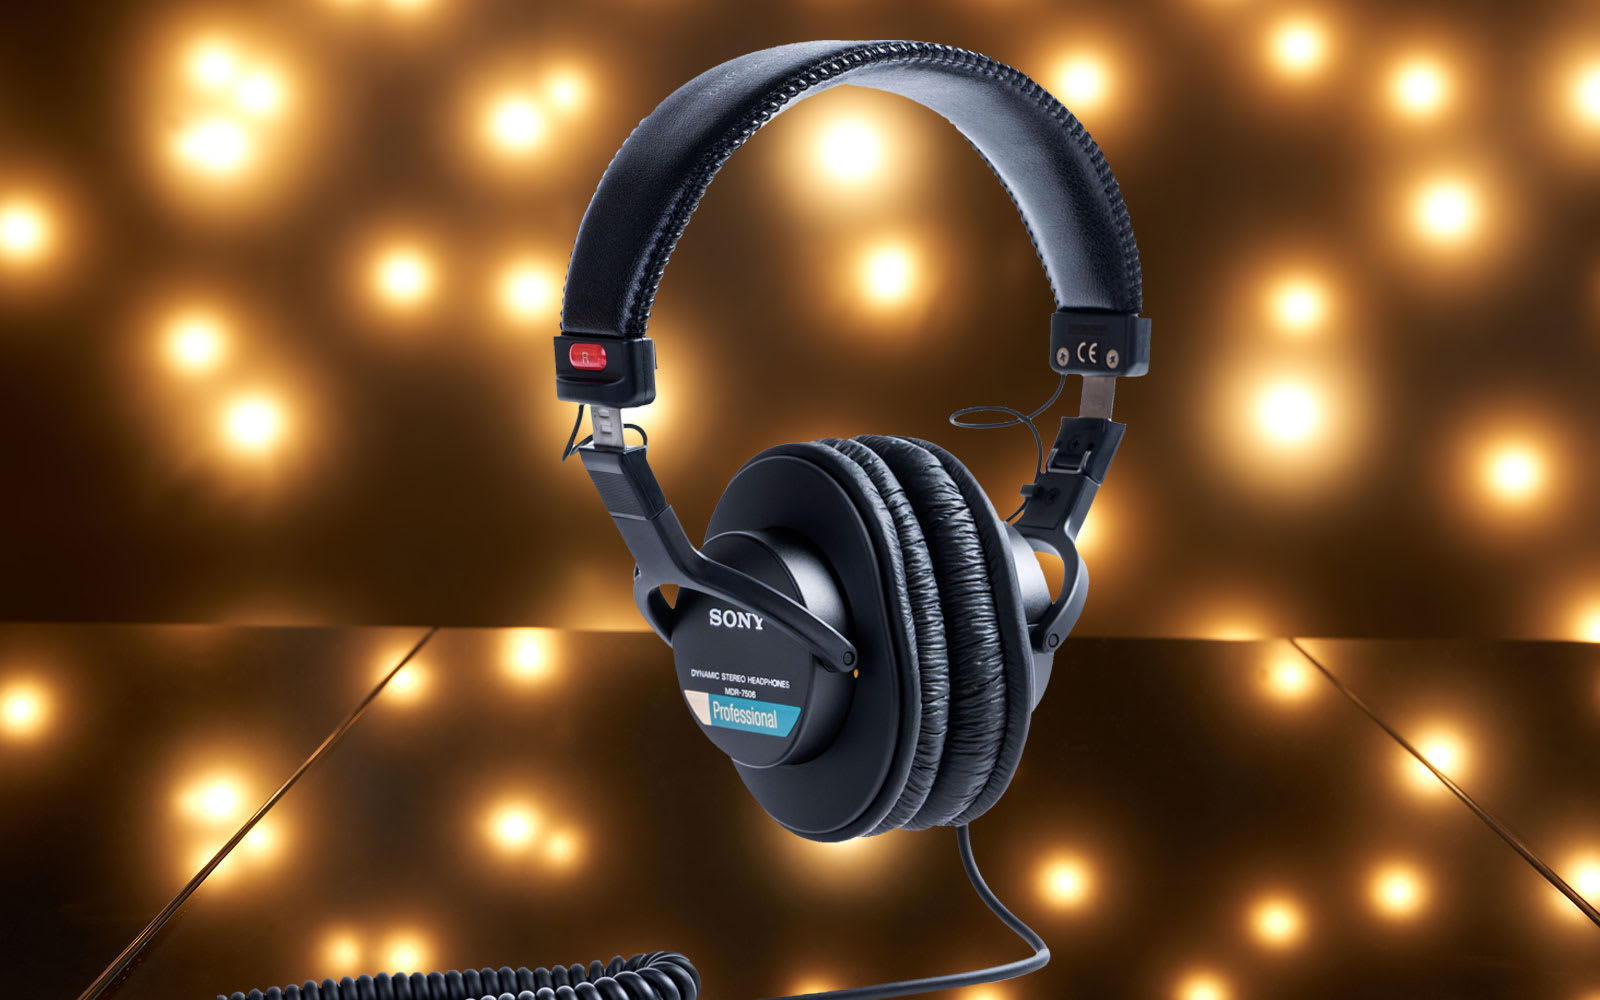 The Sony MDR-7506 headphones suspended in the air in front of a dark background dotted with bright light spots.